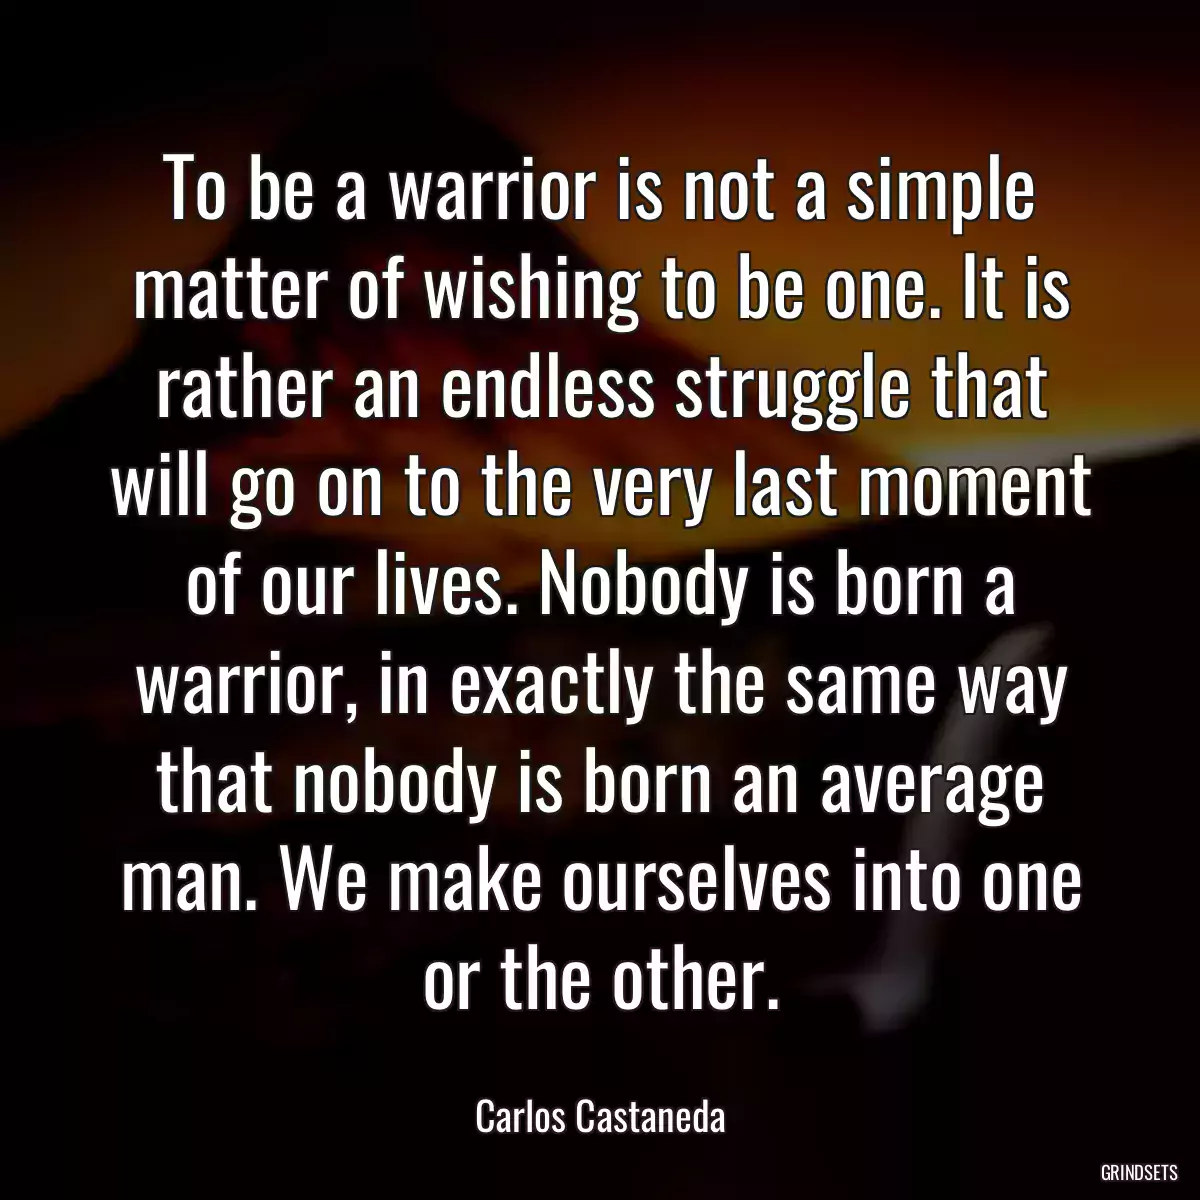 To be a warrior is not a simple matter of wishing to be one. It is rather an endless struggle that will go on to the very last moment of our lives. Nobody is born a warrior, in exactly the same way that nobody is born an average man. We make ourselves into one or the other.